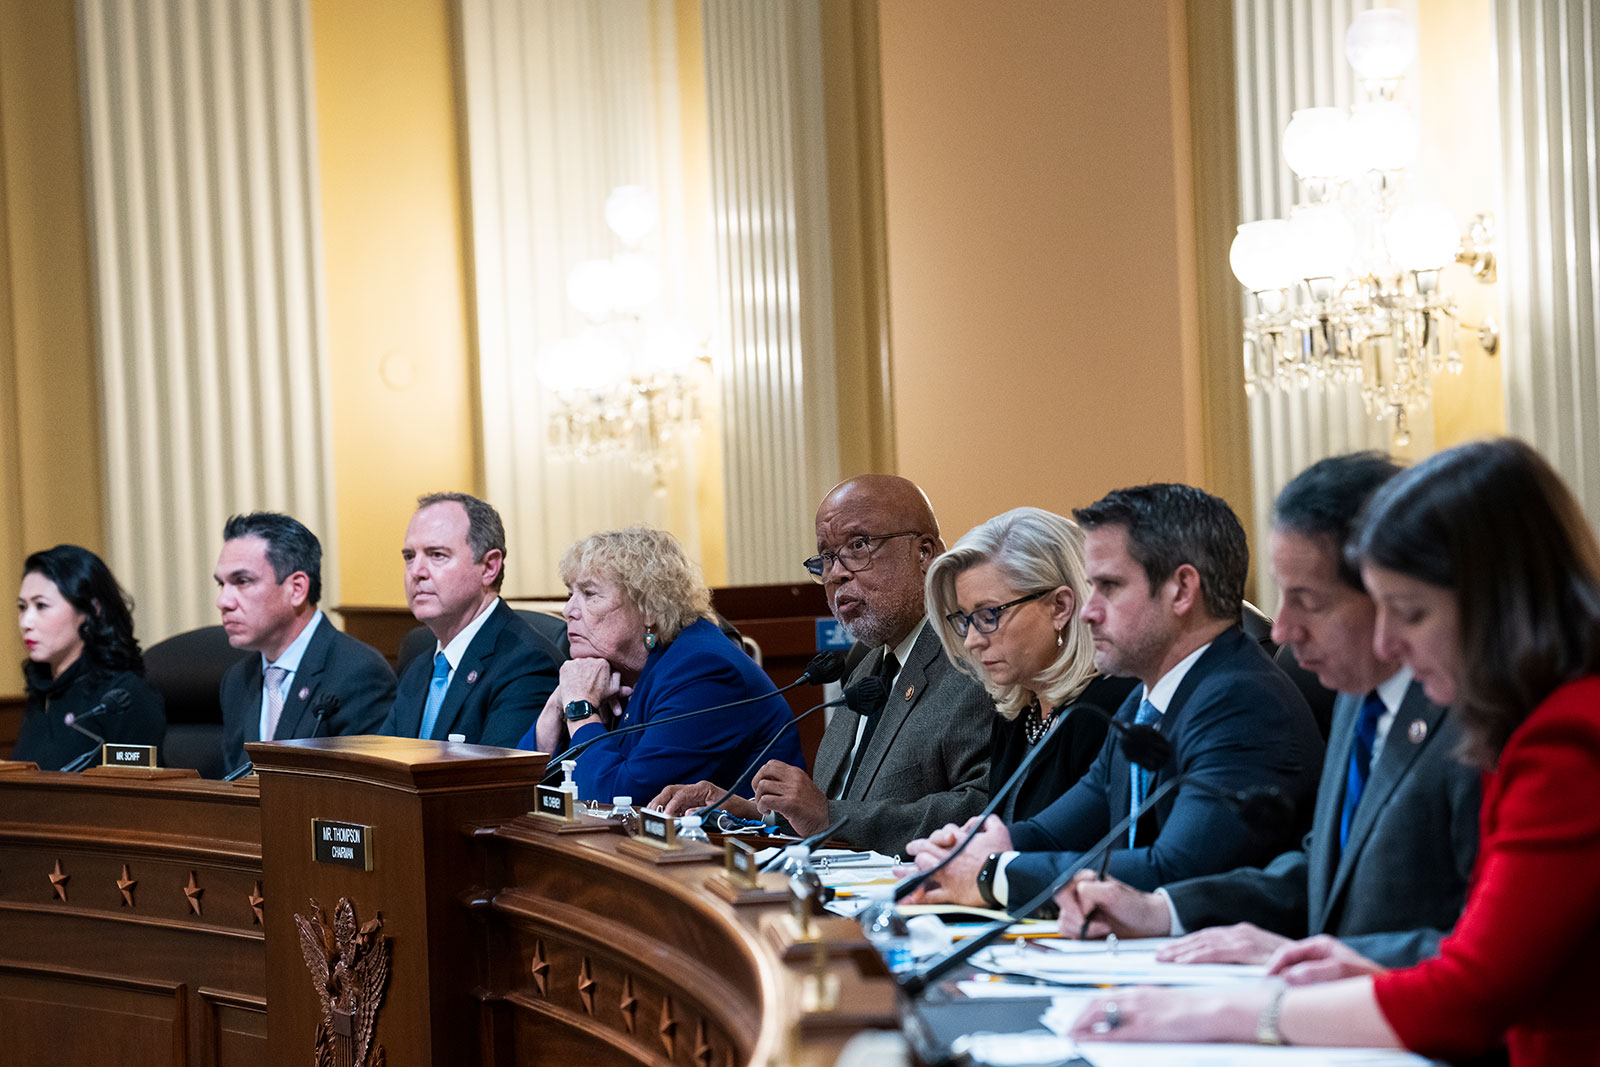 Chairman Bennie Thompson makes remarks during a House select committee meeting on December 1, 2021.